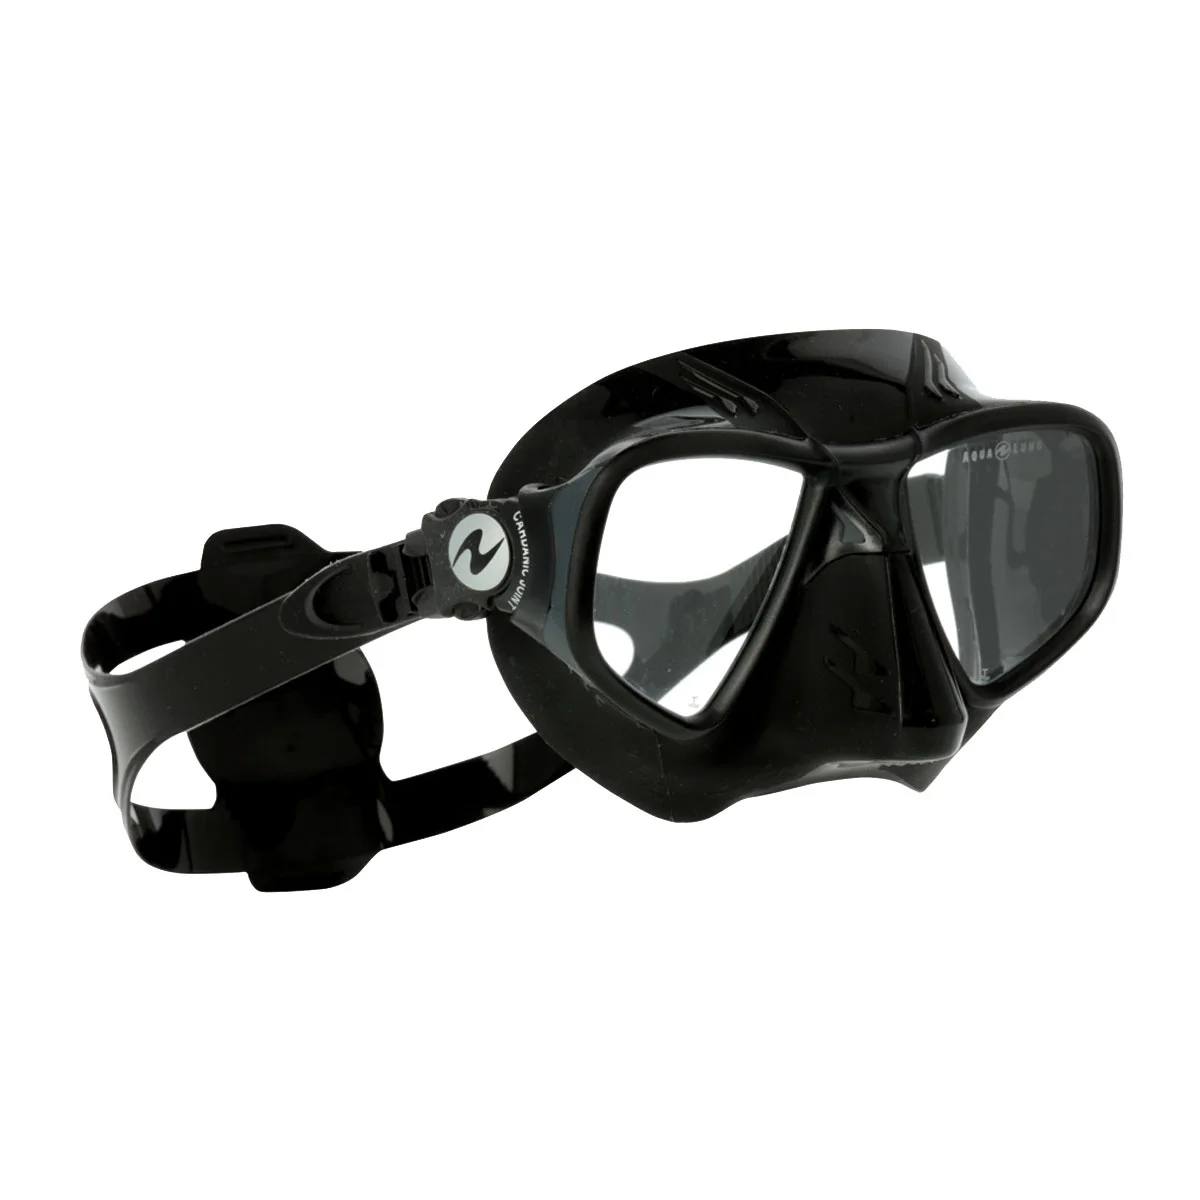 Aqualung Sphera X - Mirrored Lens - White/Gold Freediving Mask